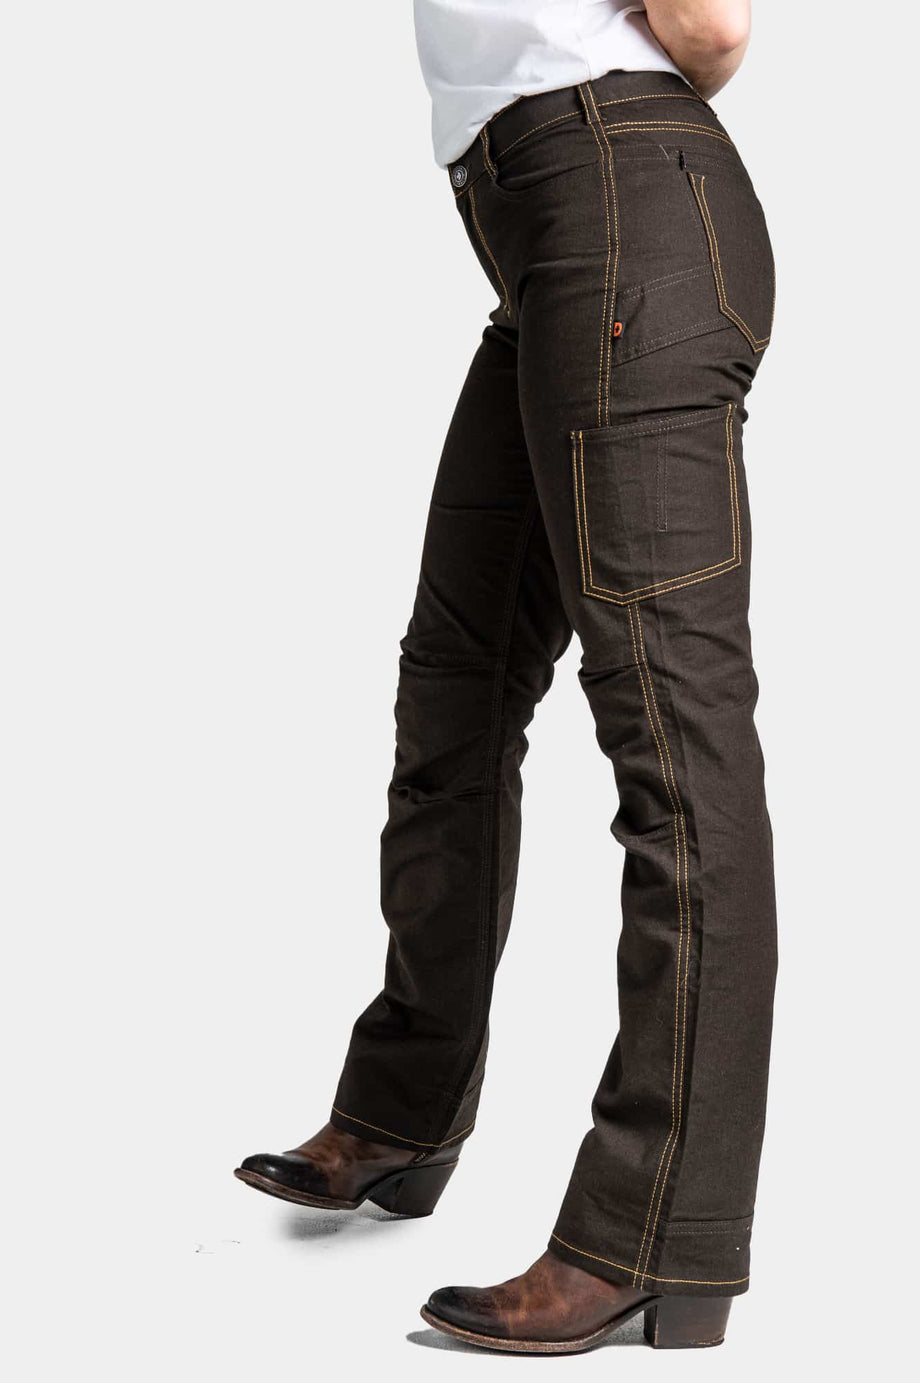 DX Bootcut in CORDURA® Canvas  Heavy Duty Mid-rise Work Pant for